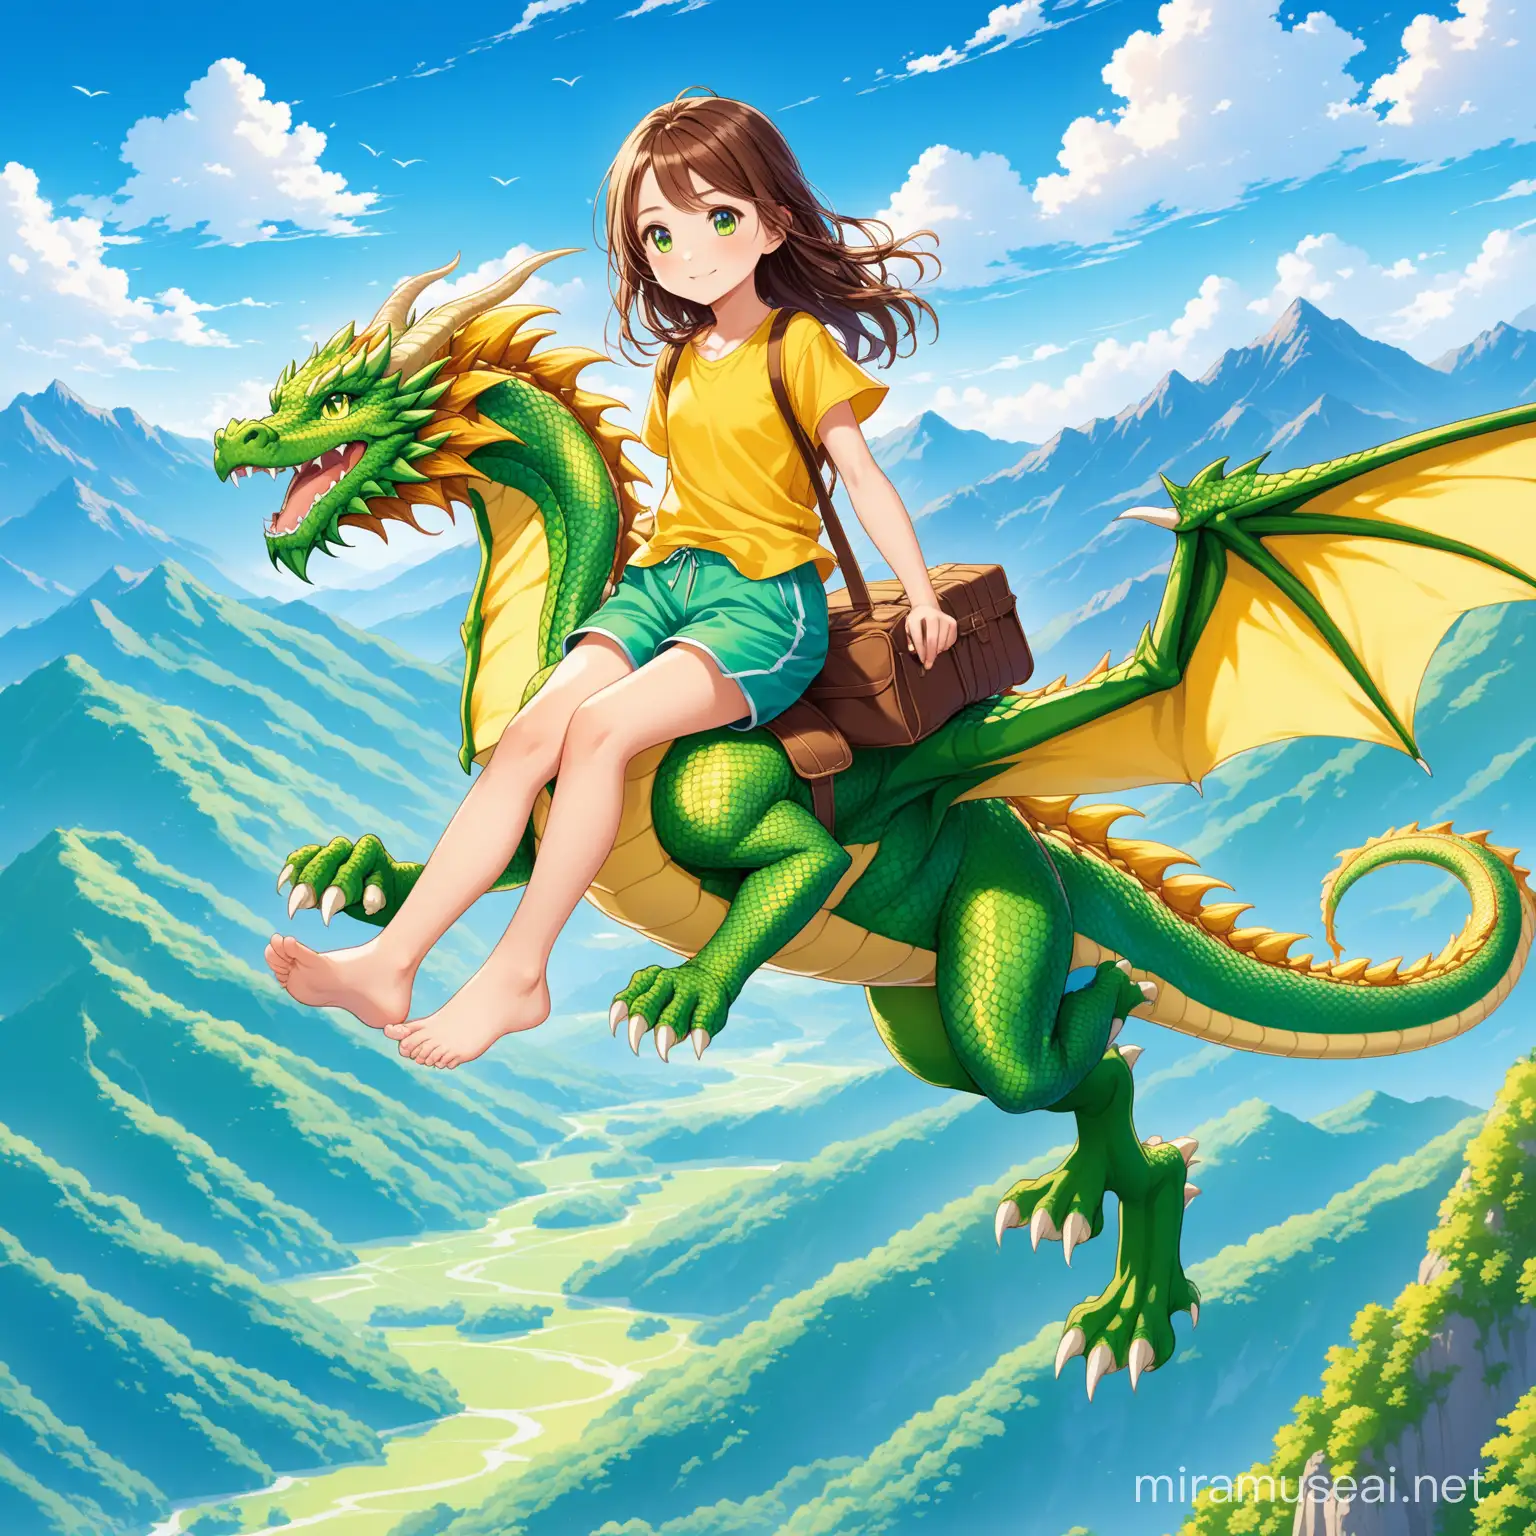 Young Girl Riding a Colorful Dragon over Mountain Landscape